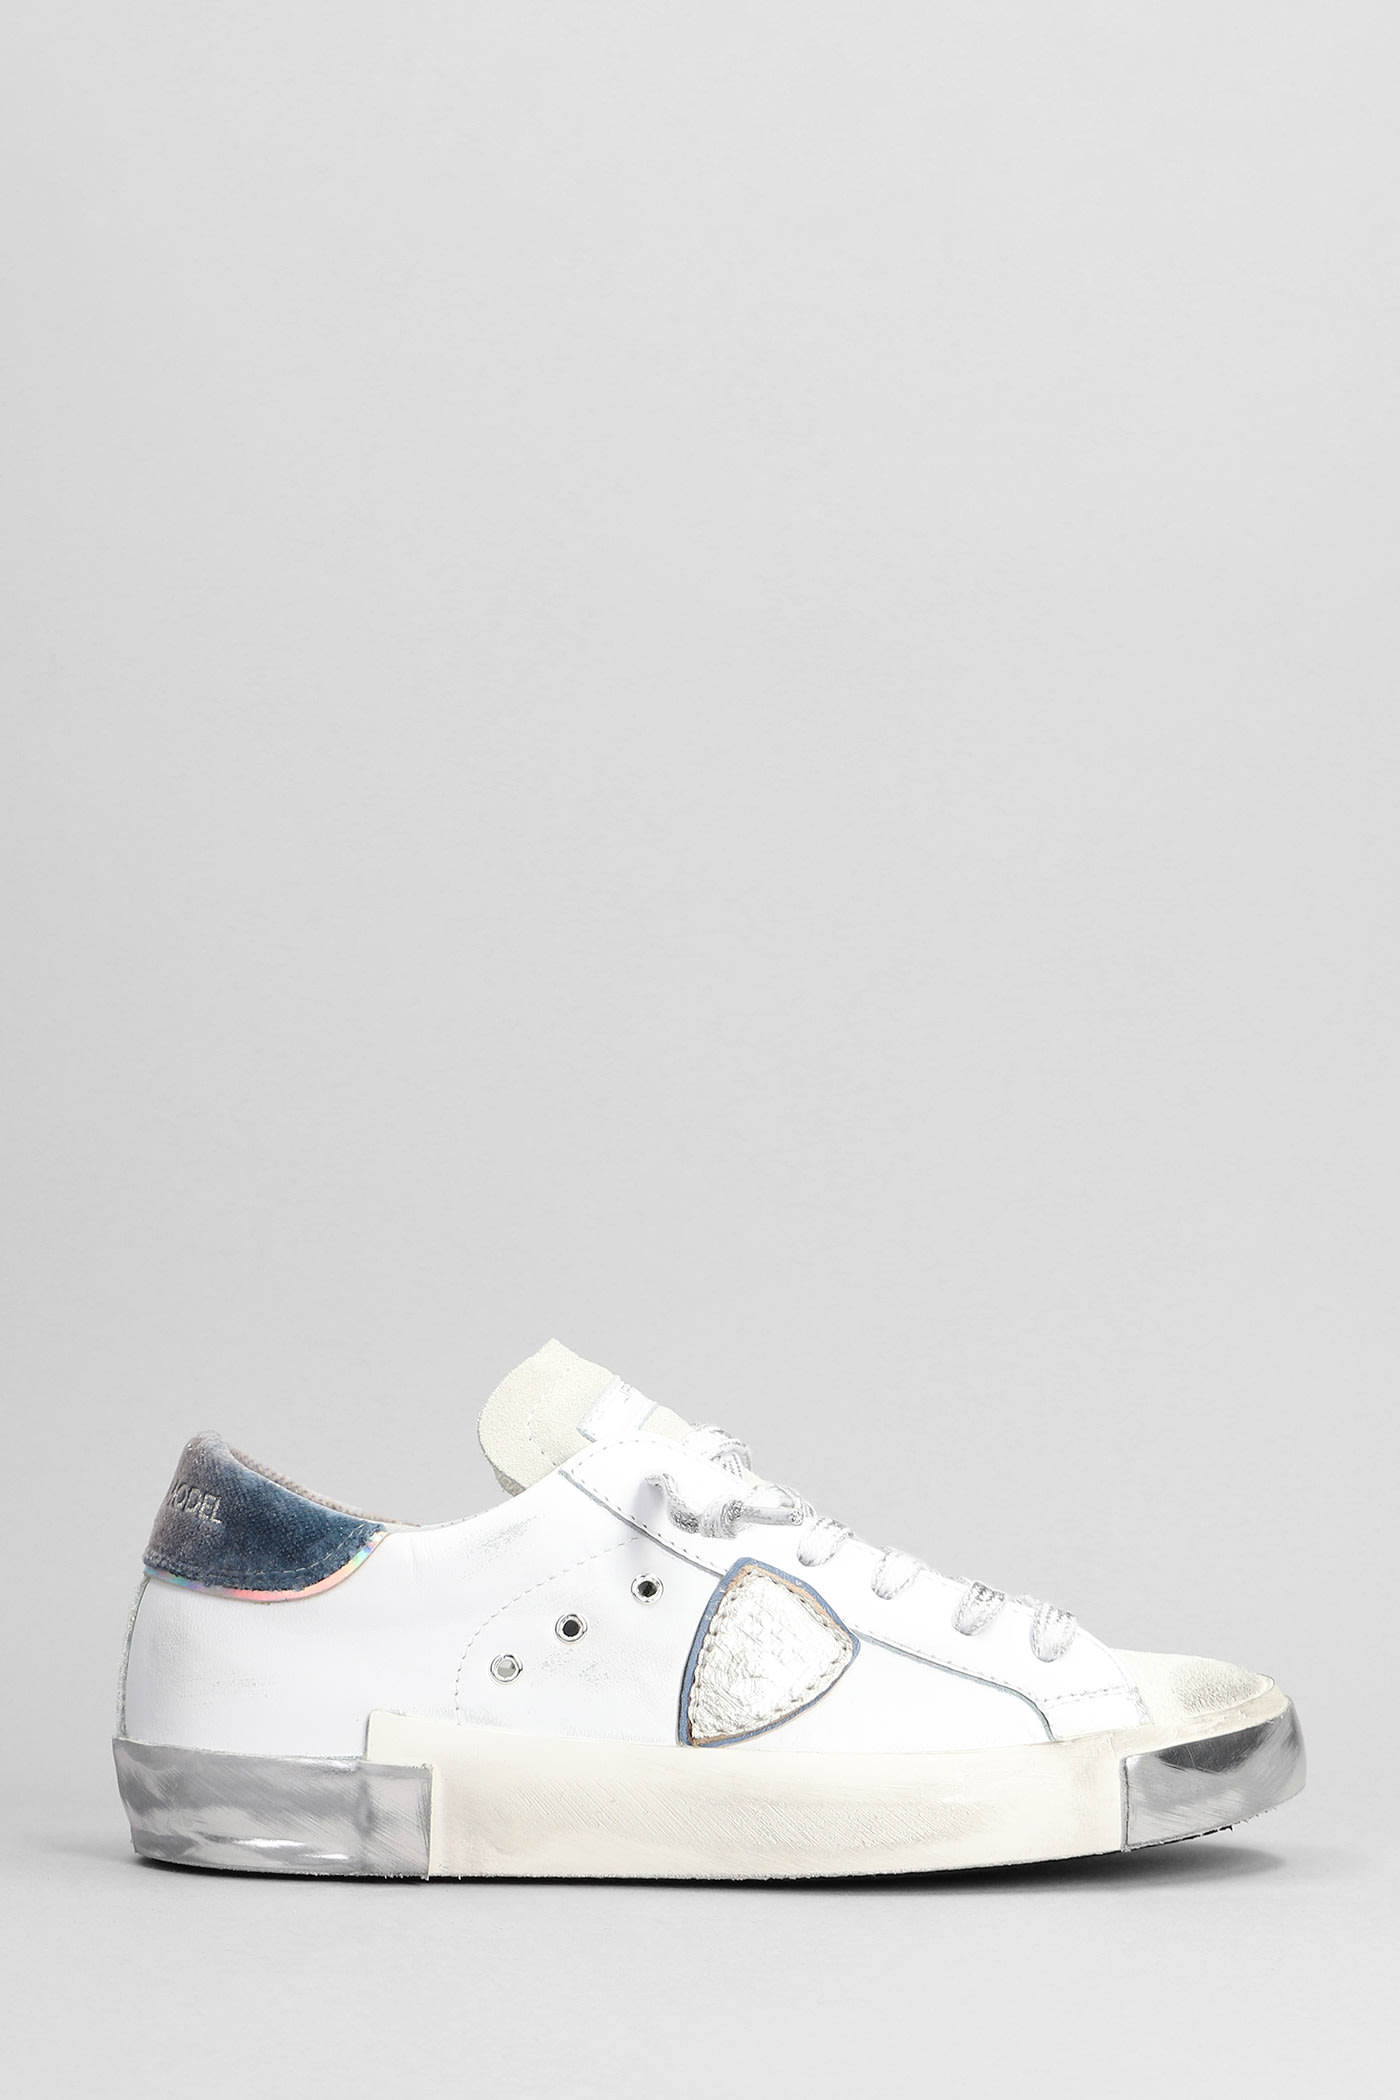 Philippe Model Prsx Sneakers In White Suede And Leather